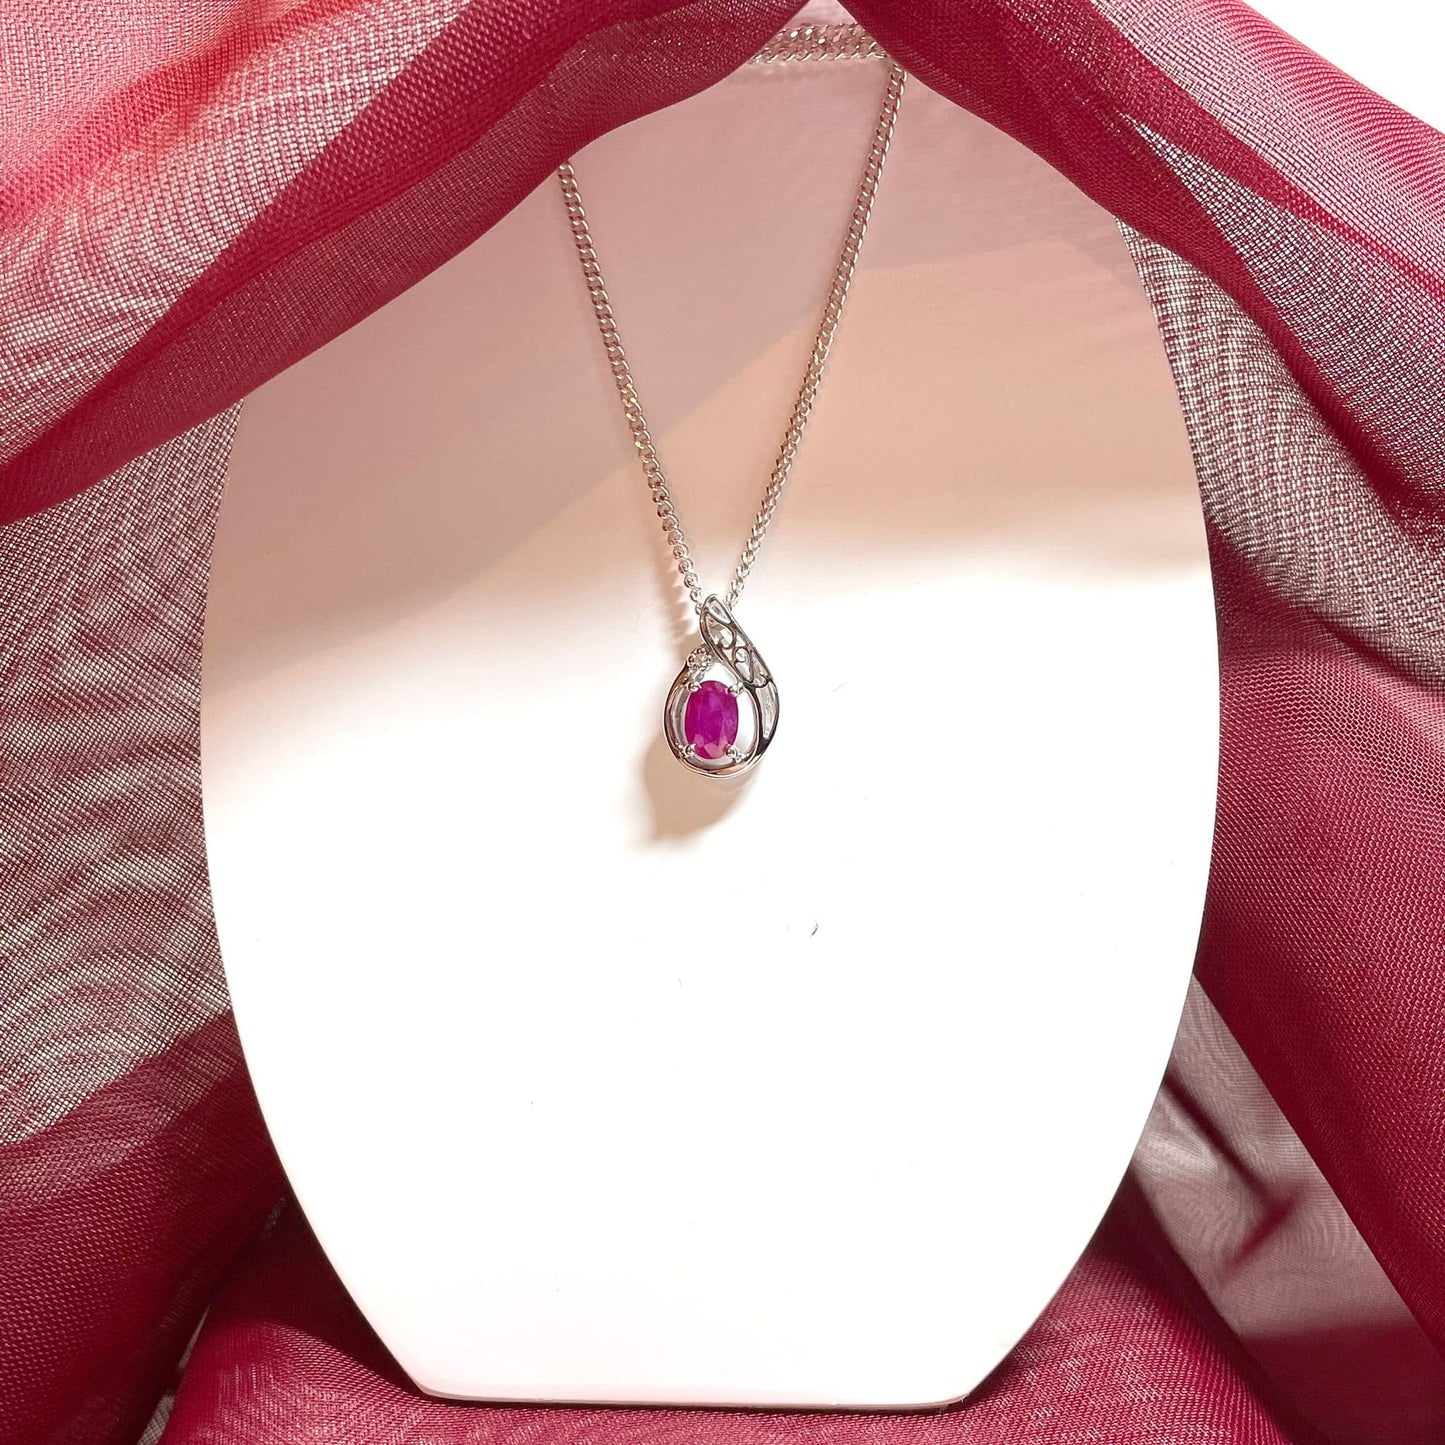 Fancy Oval Ruby And Diamond Tear Drop Sterling Silver Red Necklace Pendant